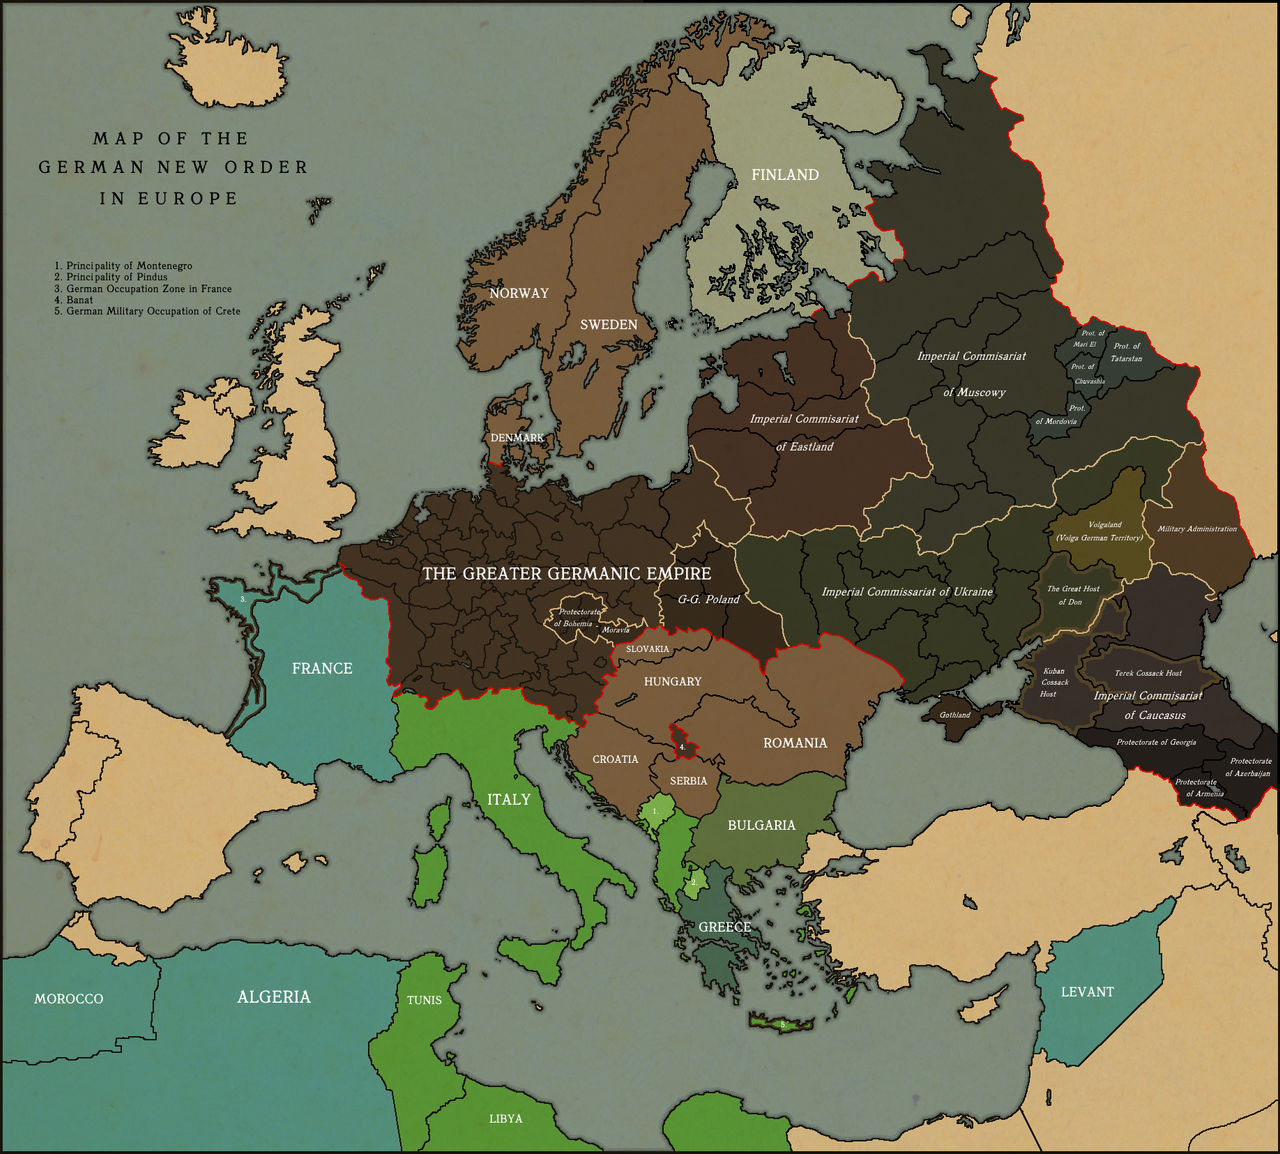 yet_another_axis_victory_scenario_by_hismajestypurplecat_dfb36y8-fullview.jpg